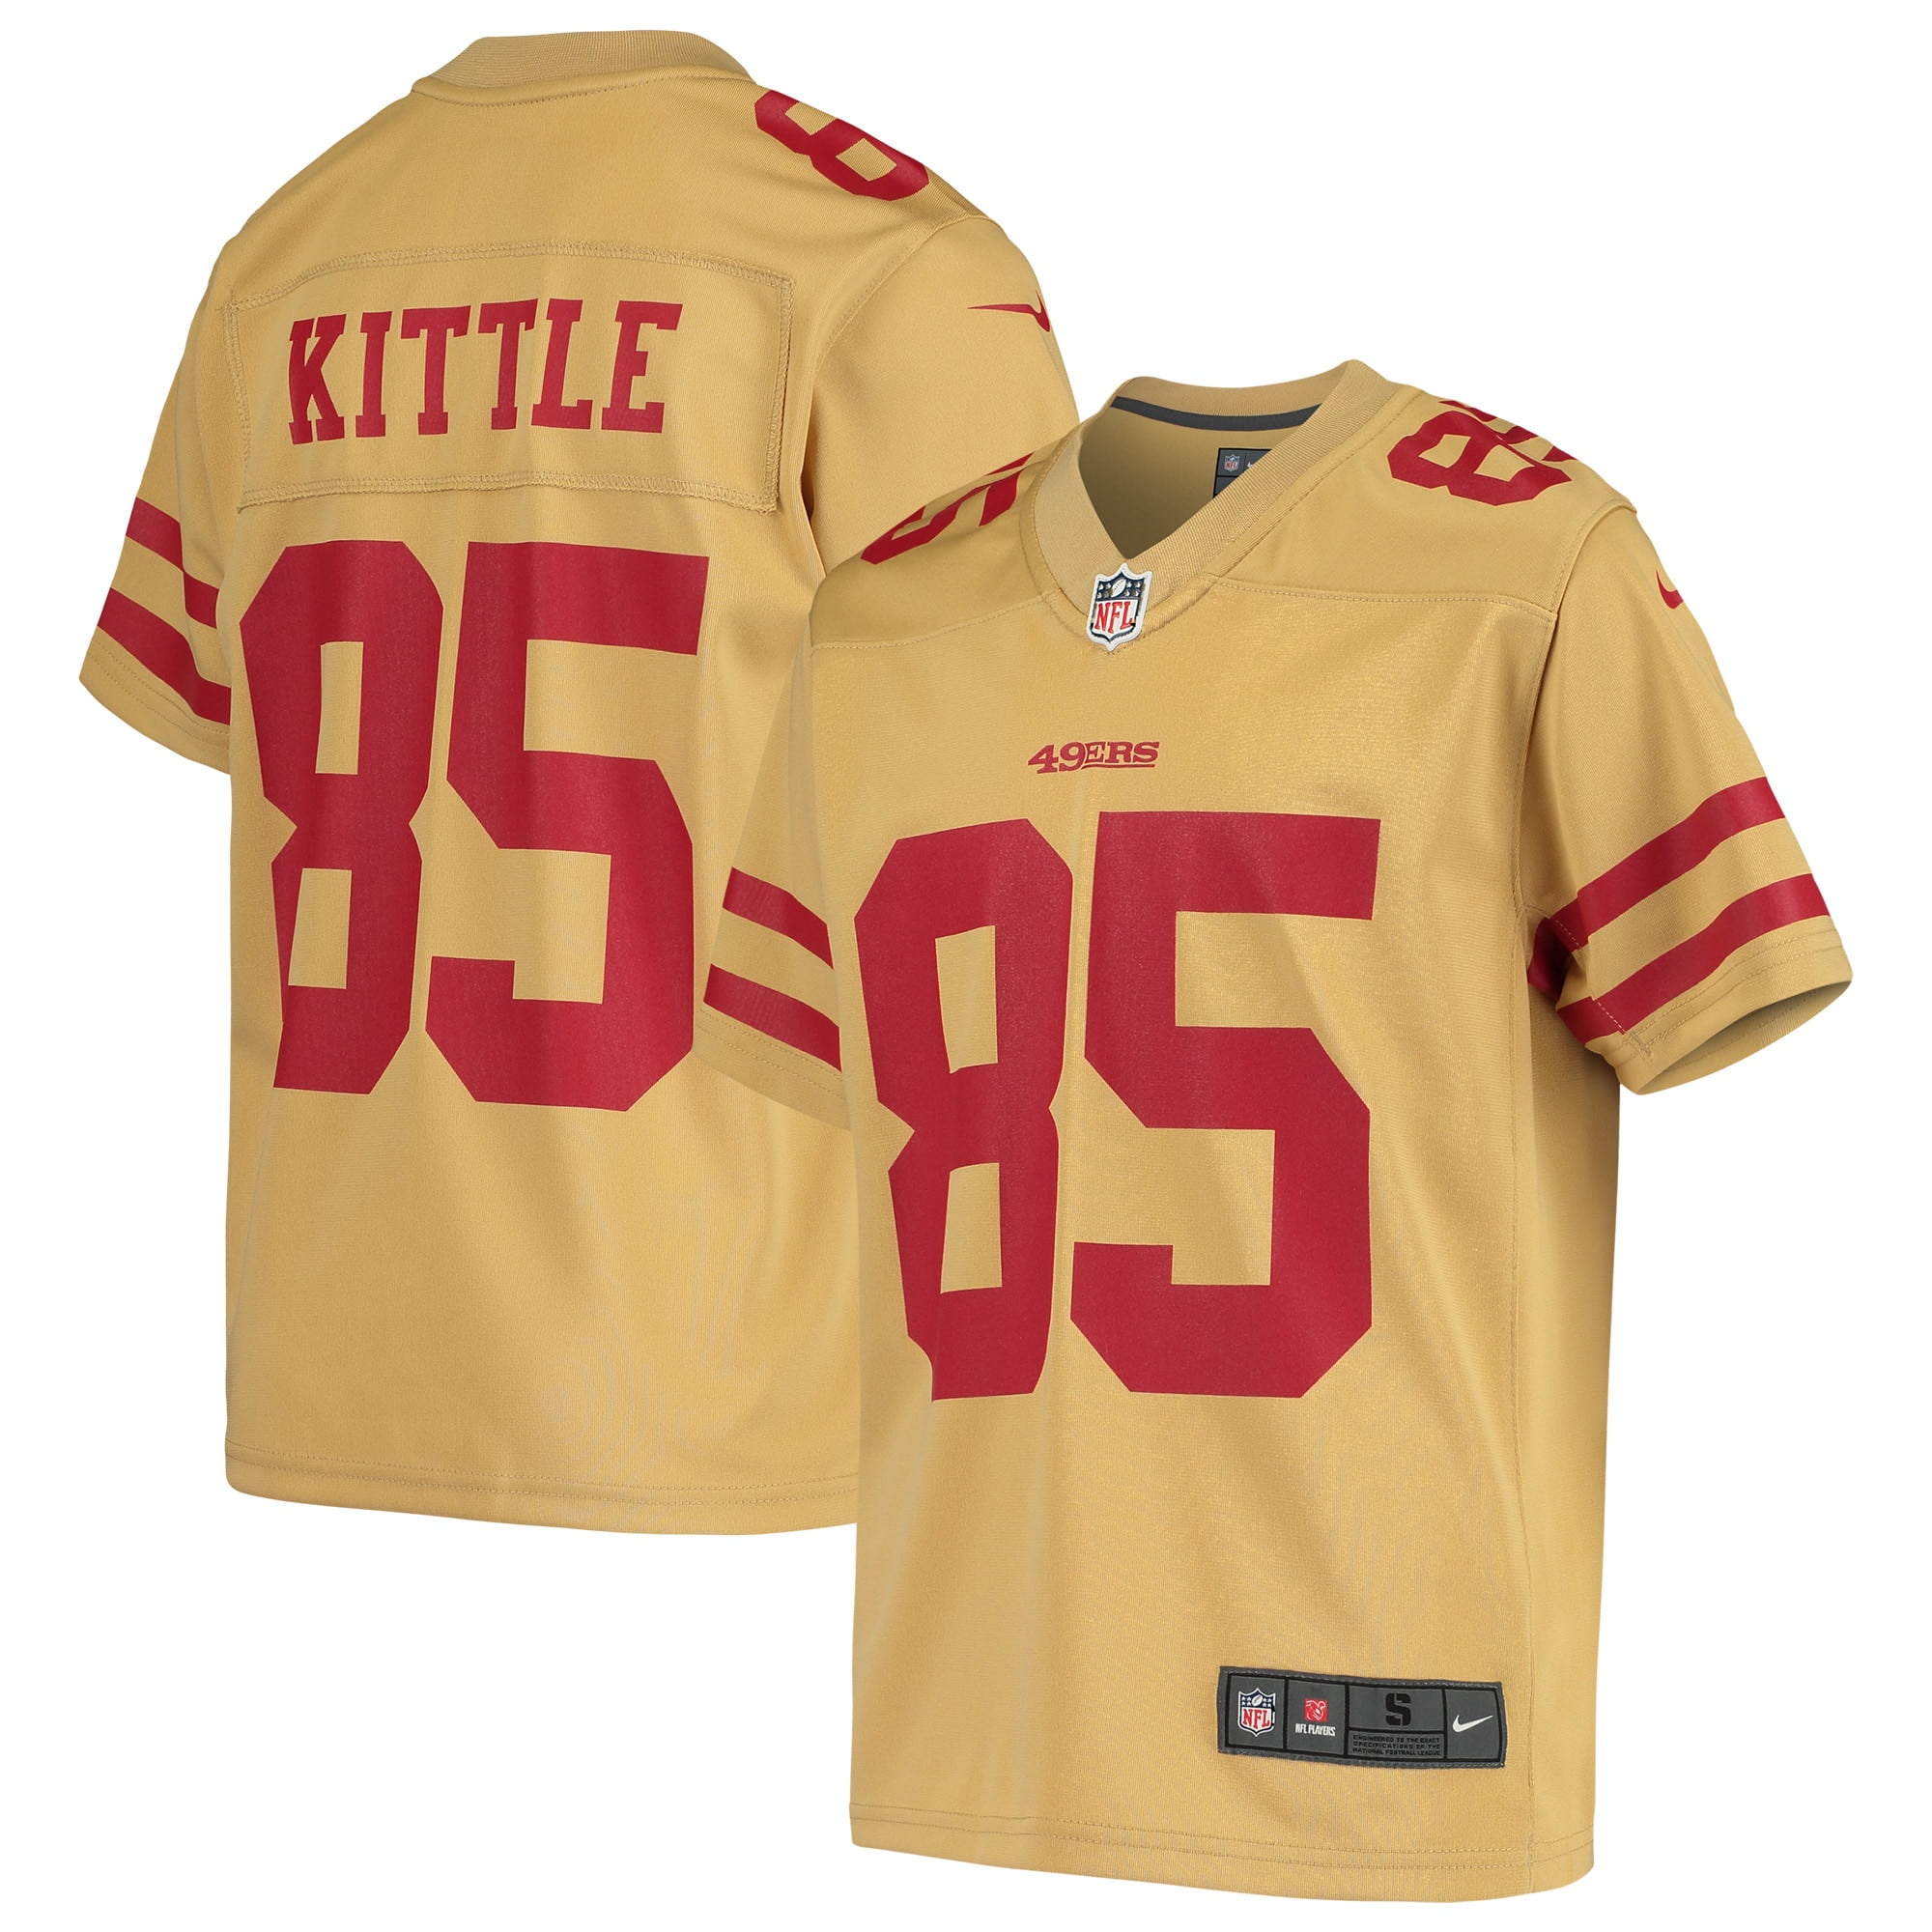 george kittle jersey youth